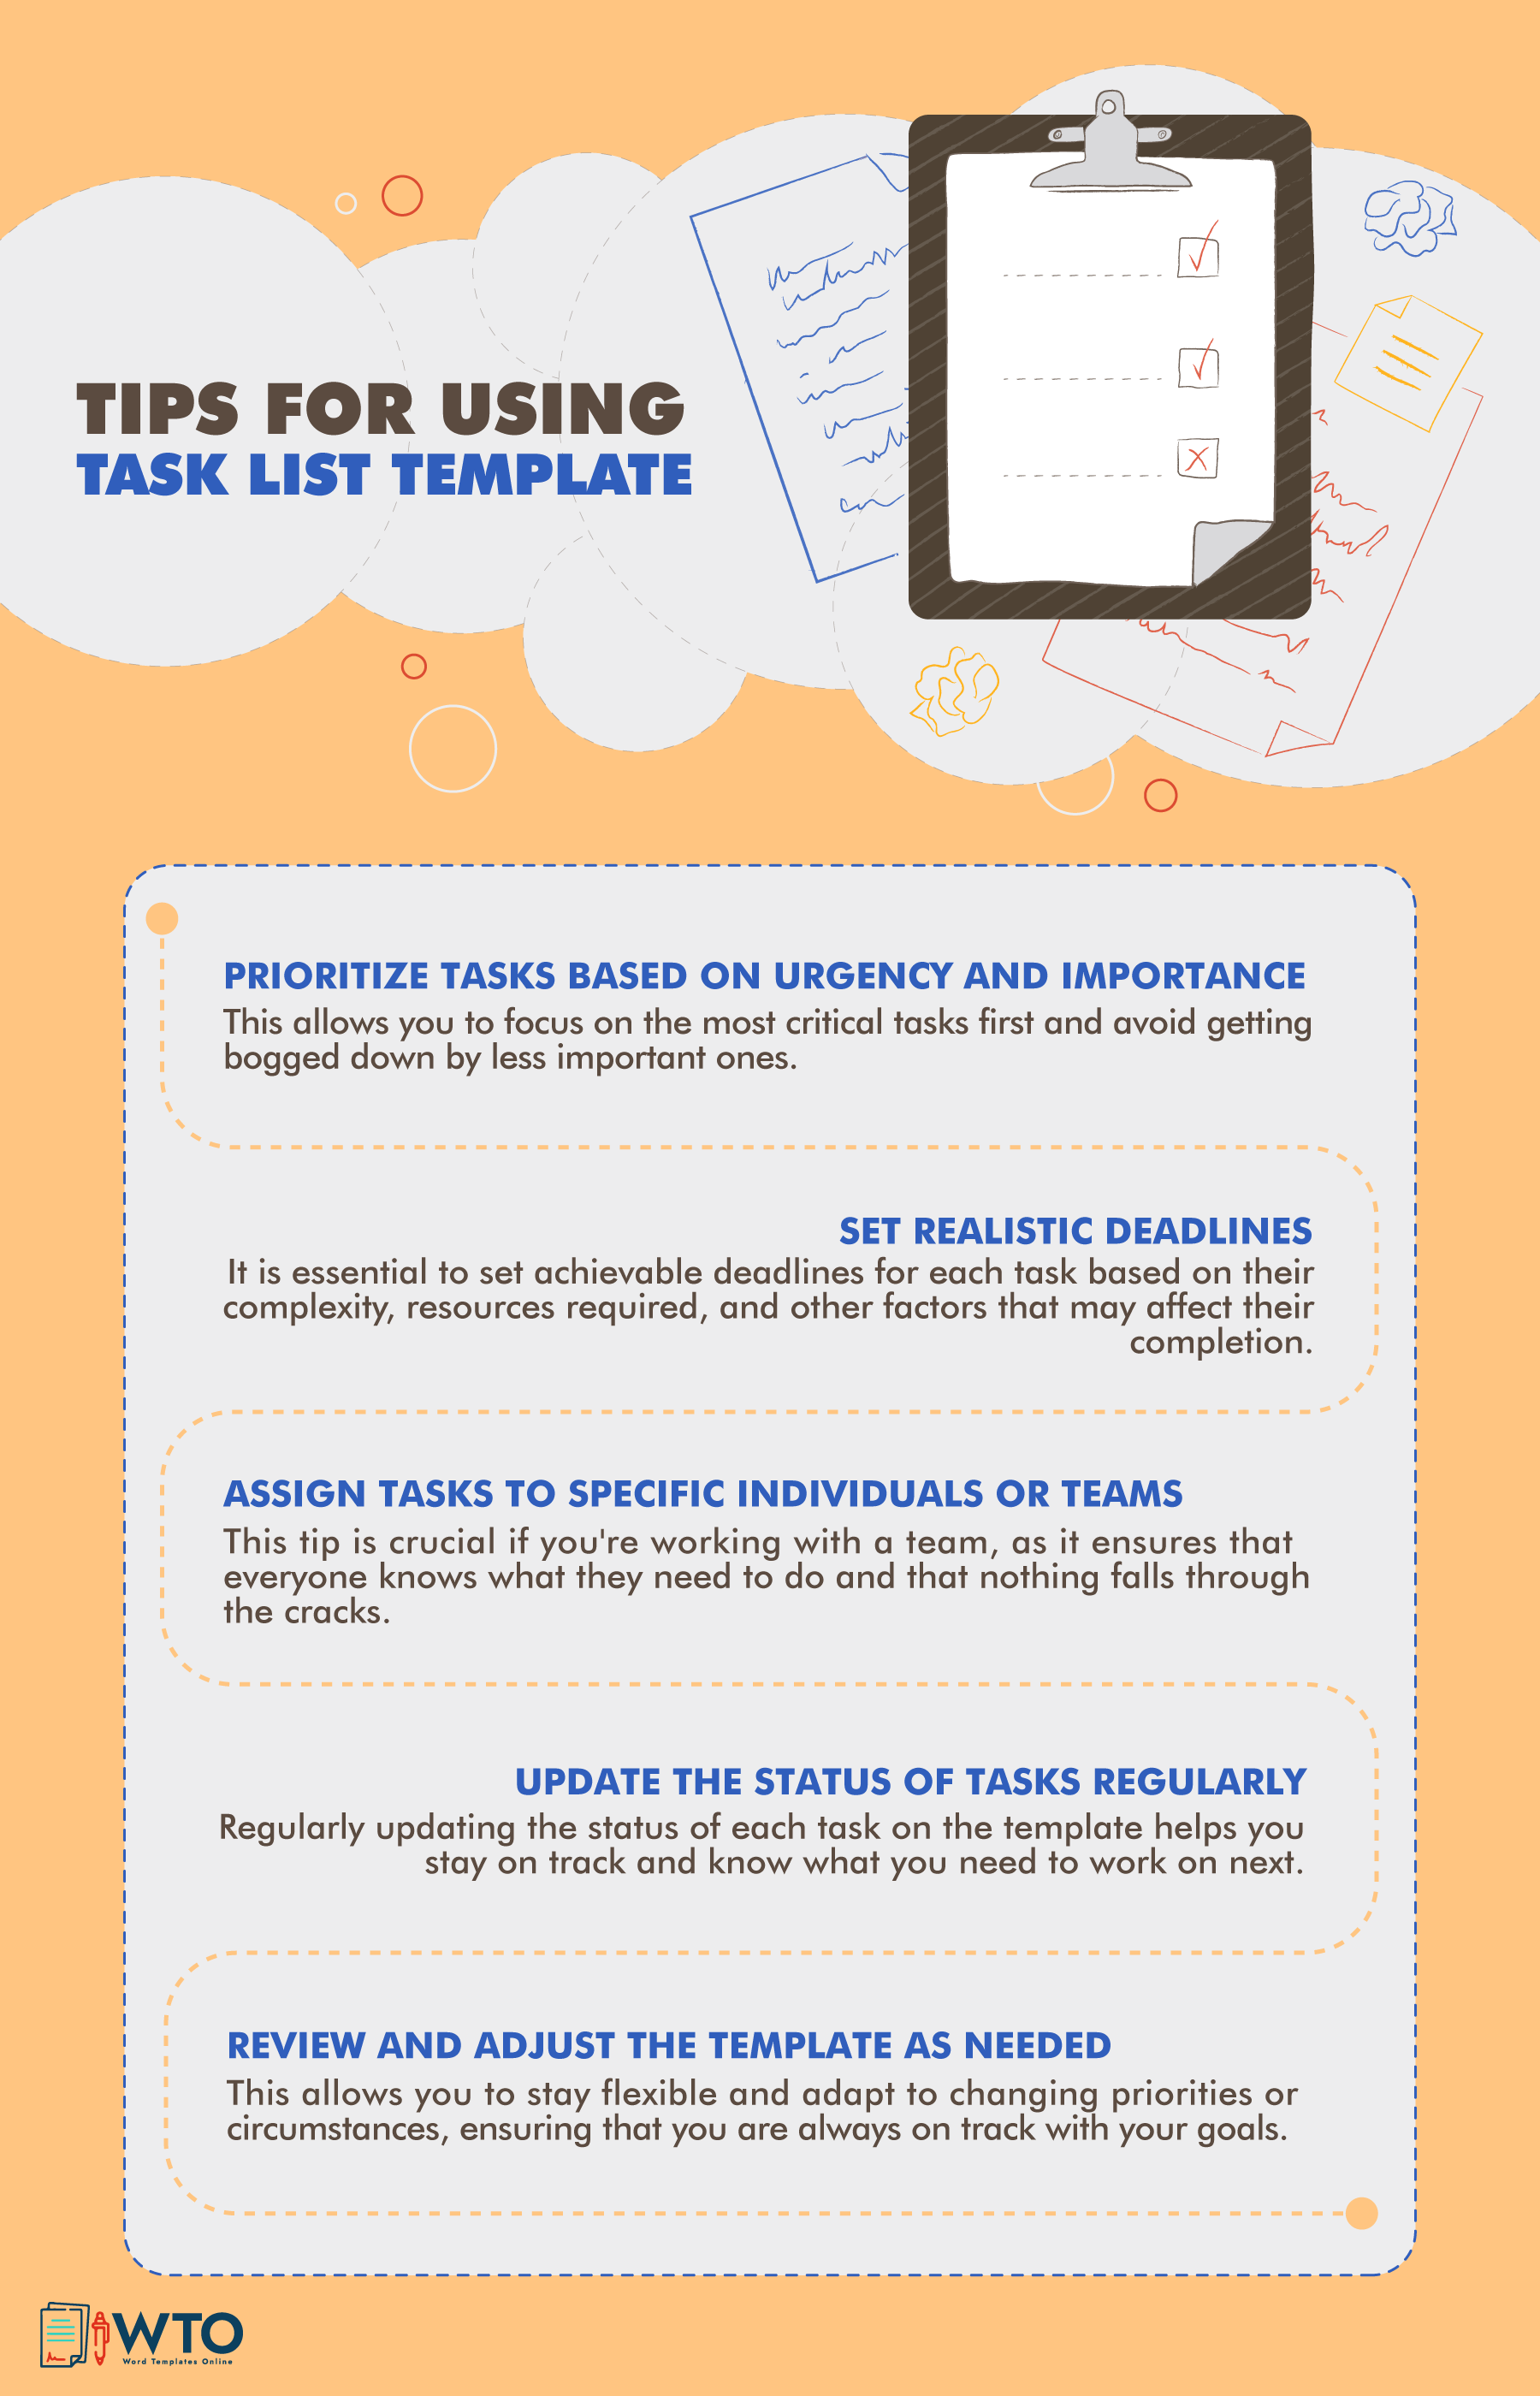 This infographic is about tips for using task list template.